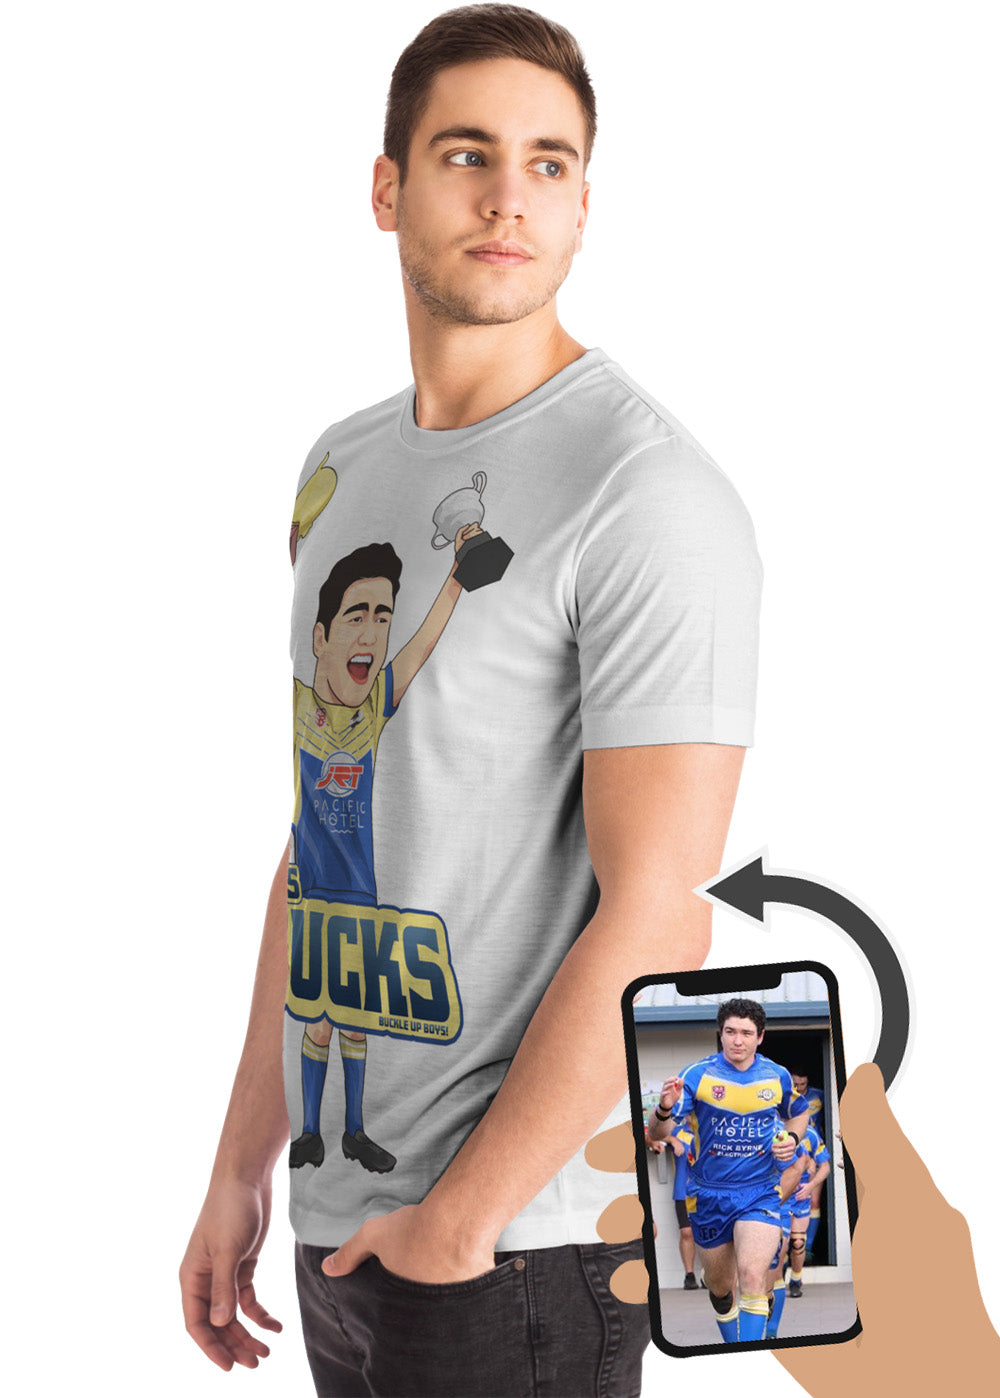 Custom Novelty Cartoon Birthday Party T-Shirt (18th, 21st, 30th, 40th, 50th etc.) (7+ Piece Min.) Mens & Women's Sizing (NEXT-DAY production pricing avail.)